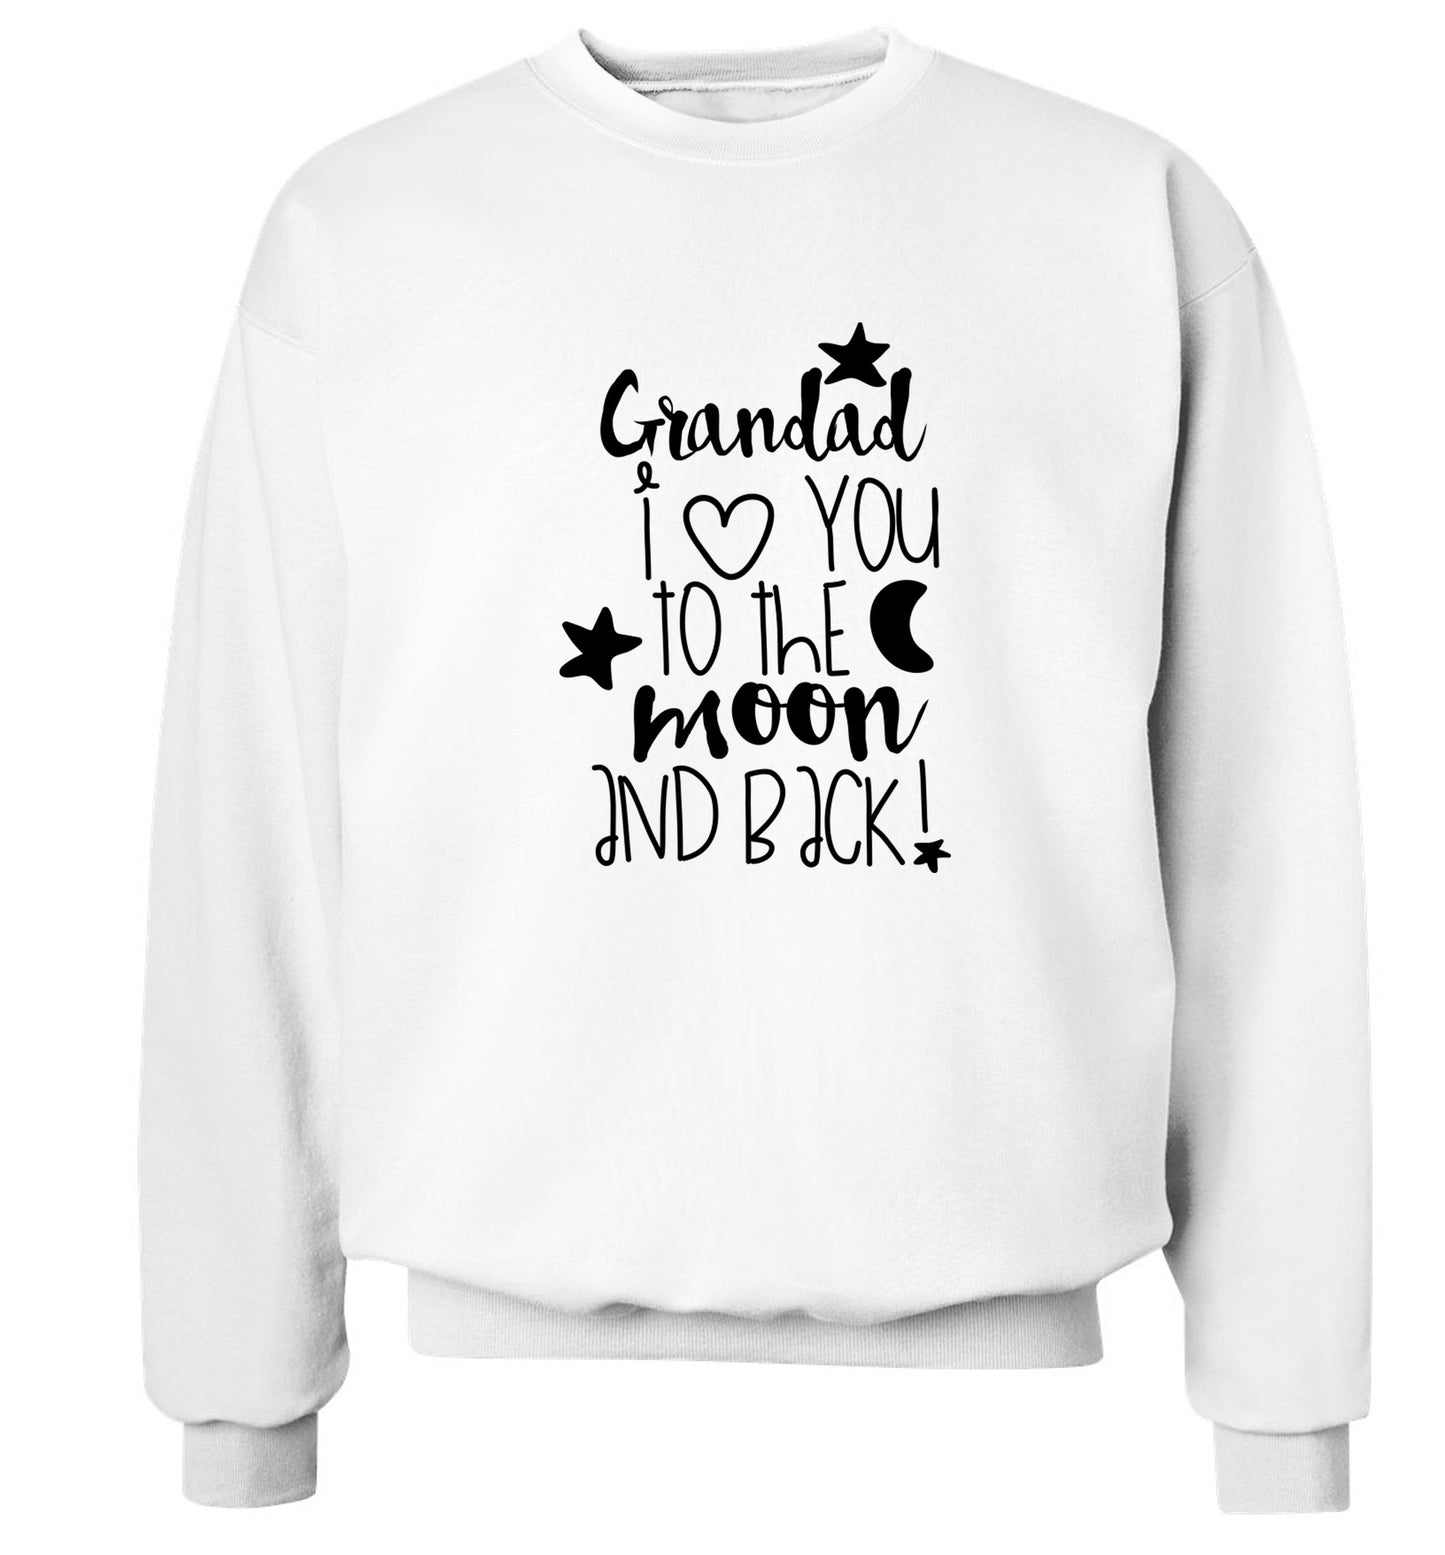 Grandad's I love you to the moon and back Adult's unisex white  sweater 2XL